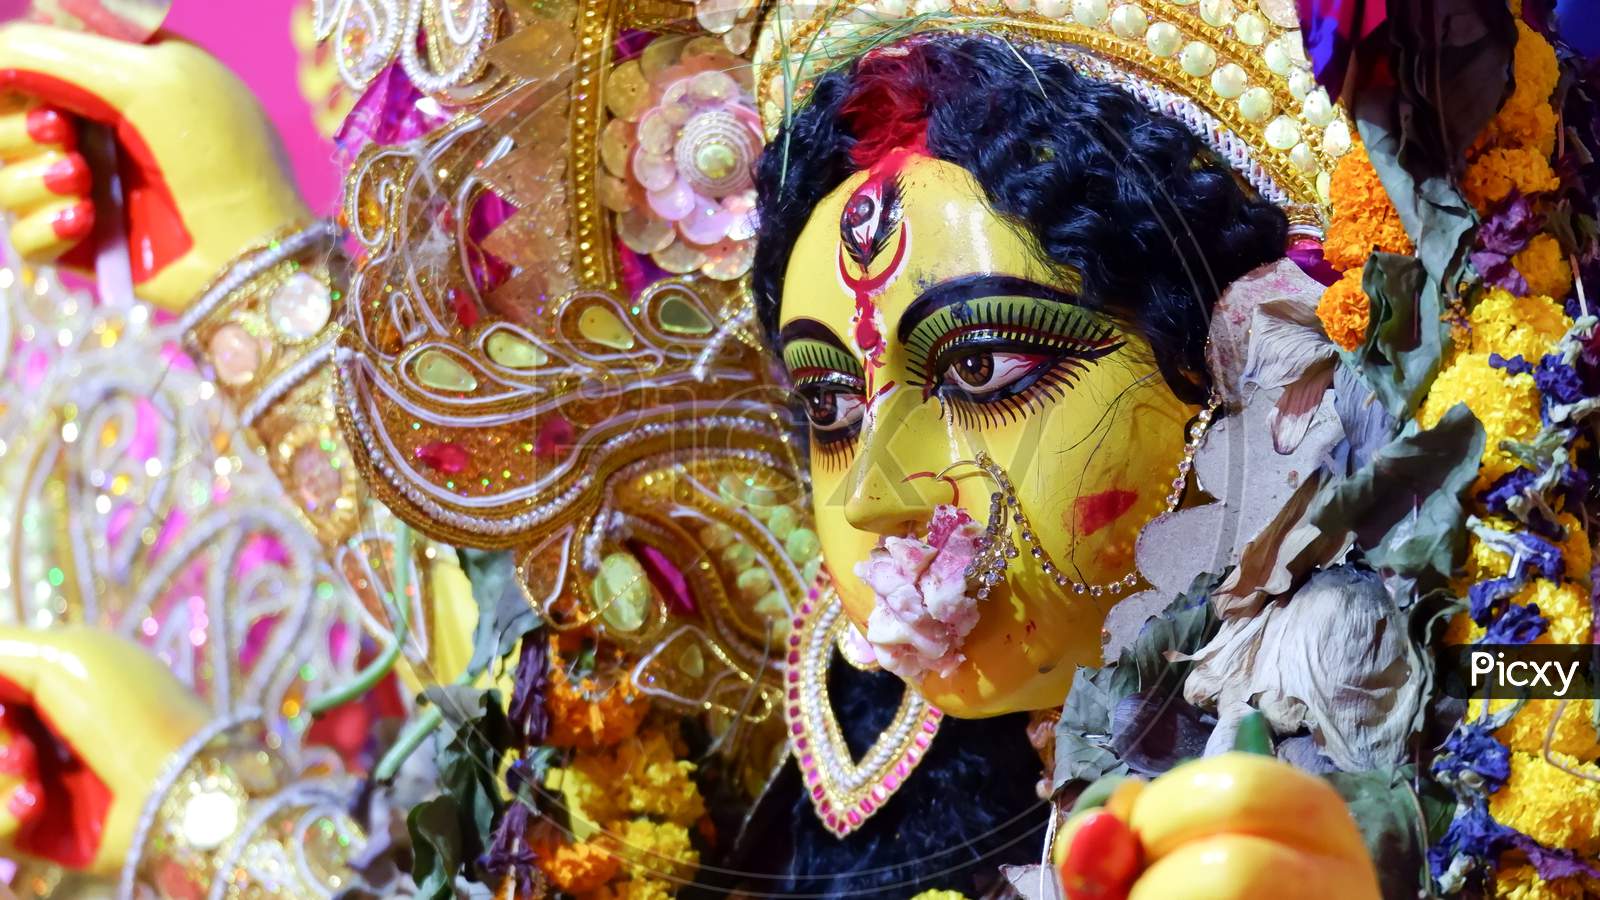 Goddess Maa Durga Face With Sindur And Sweets As Per Hindu Rituals For Devi Boron Or Saying Good Bye.